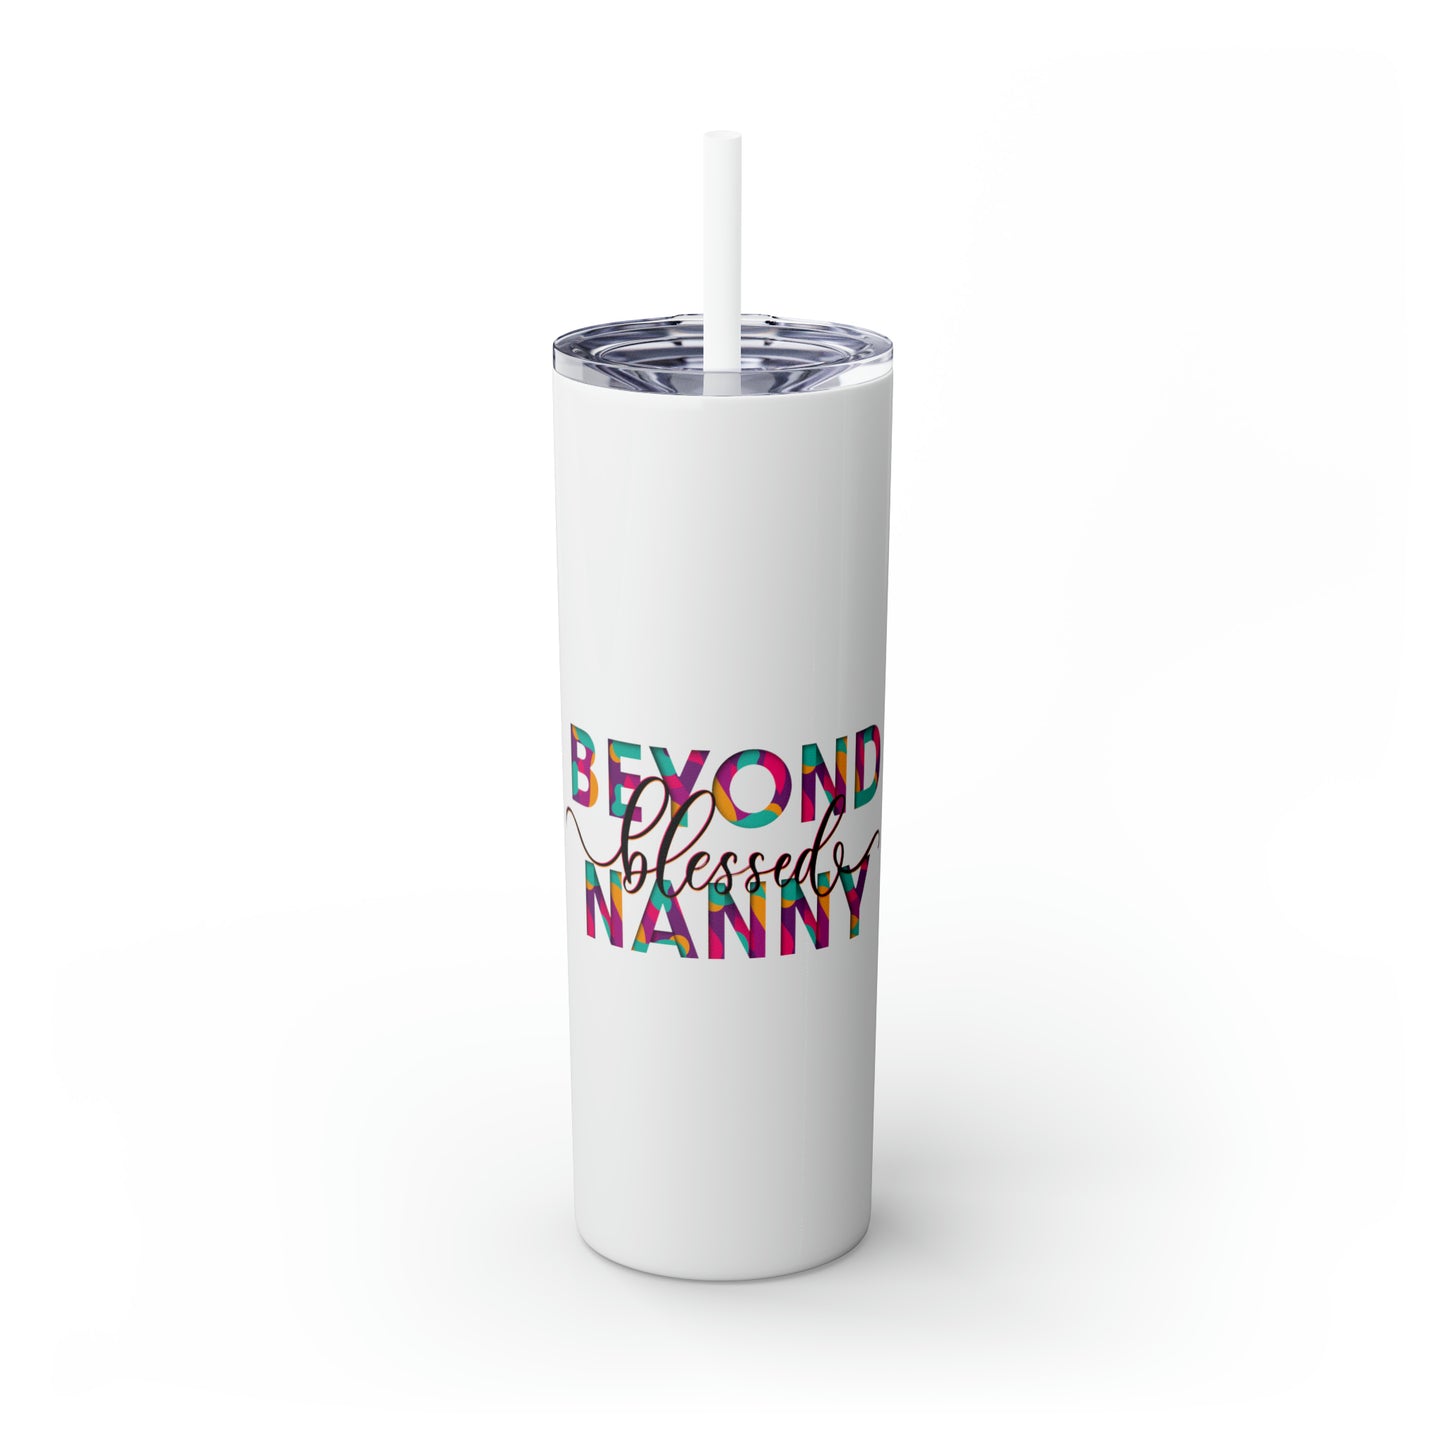 Beyond Blessed Nanny - Fun - Skinny Tumbler with Straw, 20oz